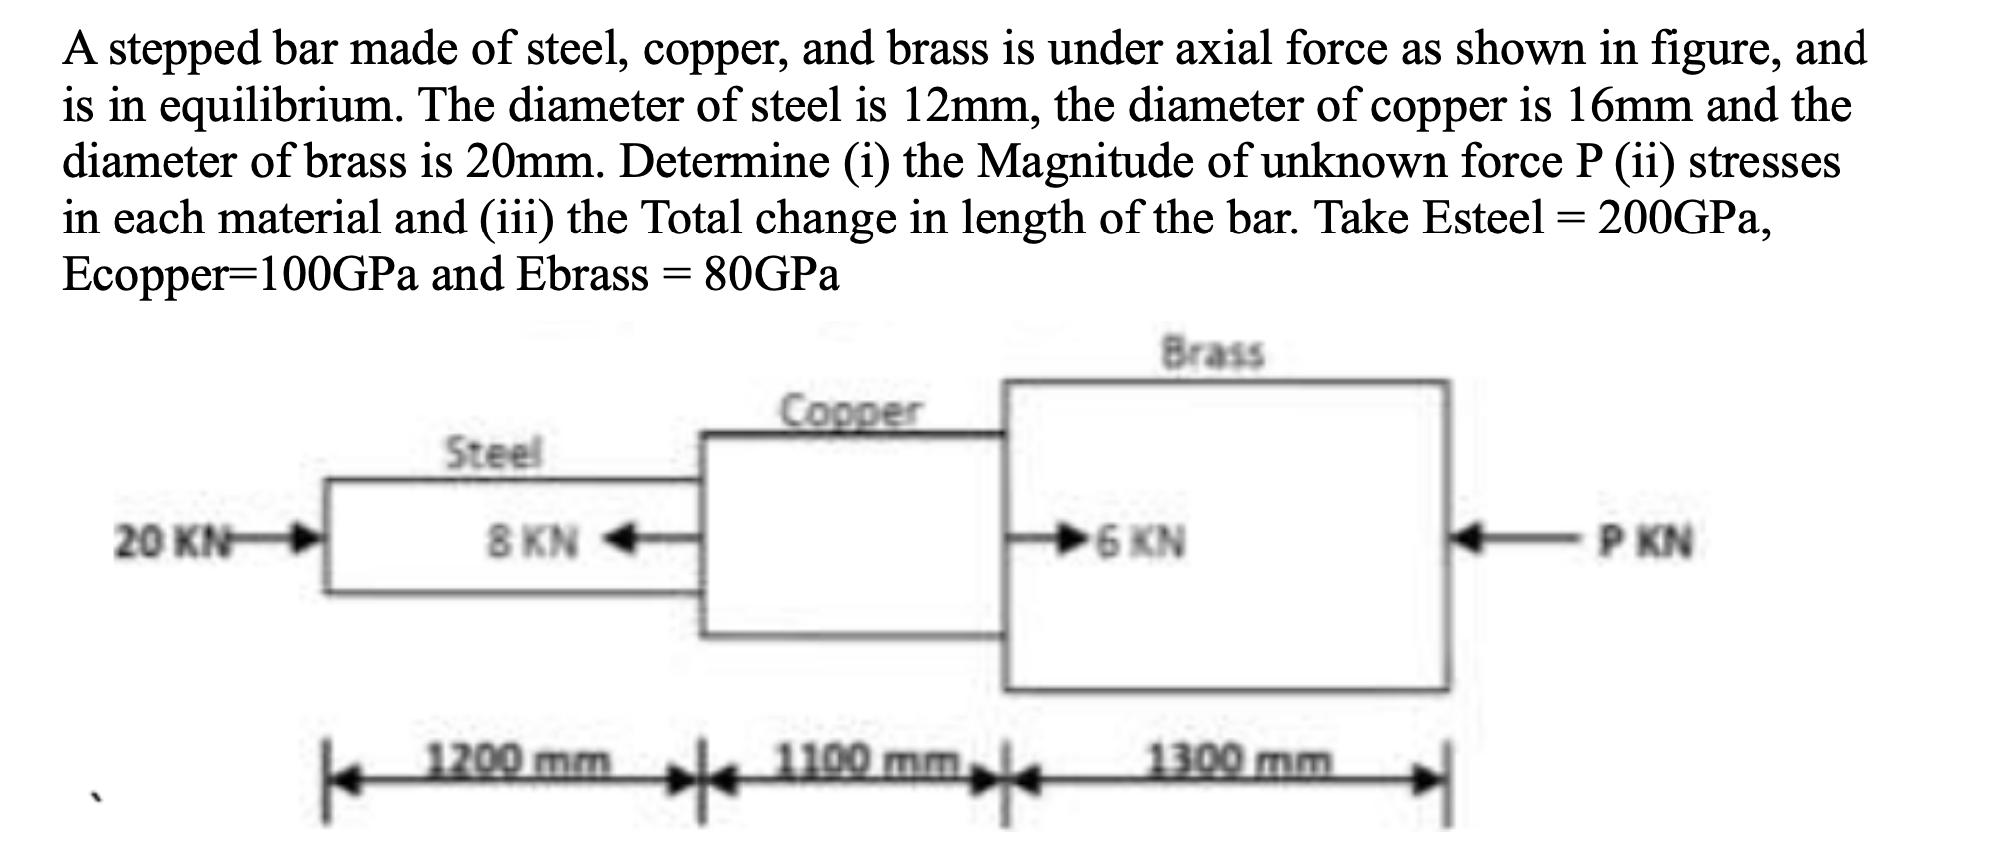 A stepped bar made of steel, copper, and brass is under axial force as shown in figure, and is in